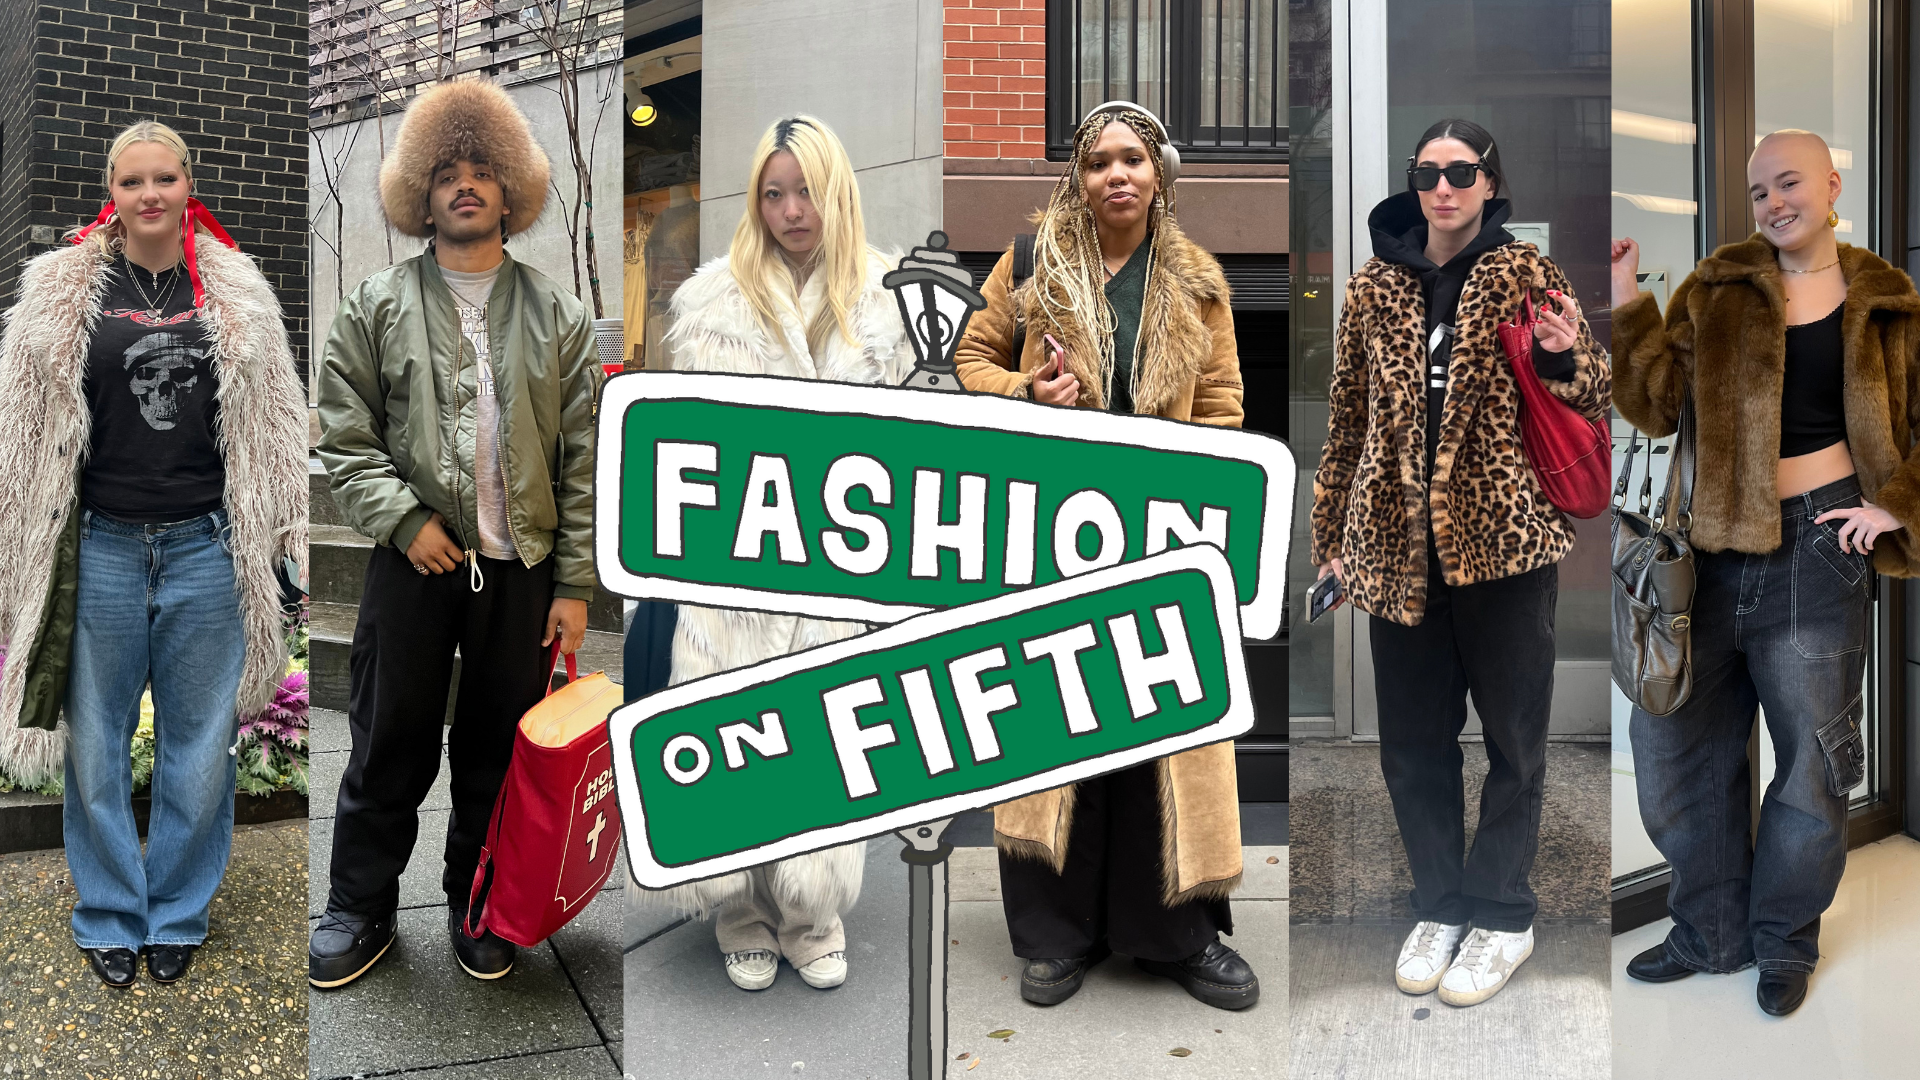 Six New School students collaged side-by-side: five wearing variations on a fur jacket and one wearing a fur hat. In the middle is an illustrated street sign that says “Fashion on Fifth.”